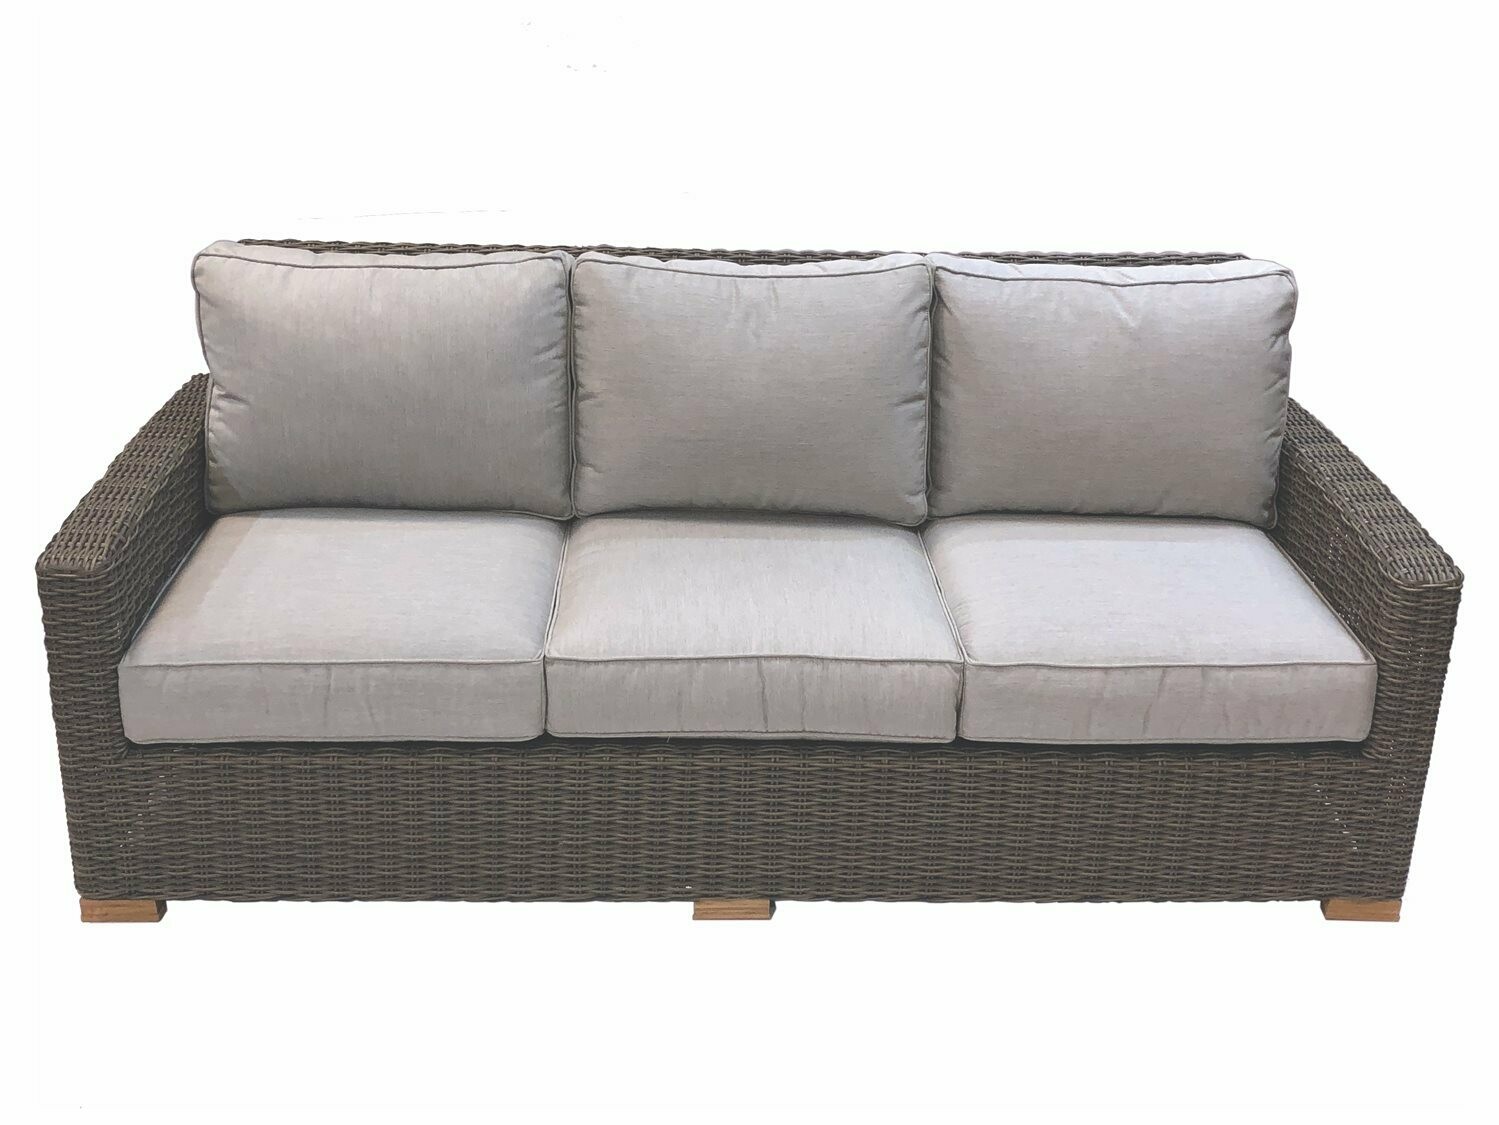 Royal Teak Collection Sanibel Sofa could be cushion up charge